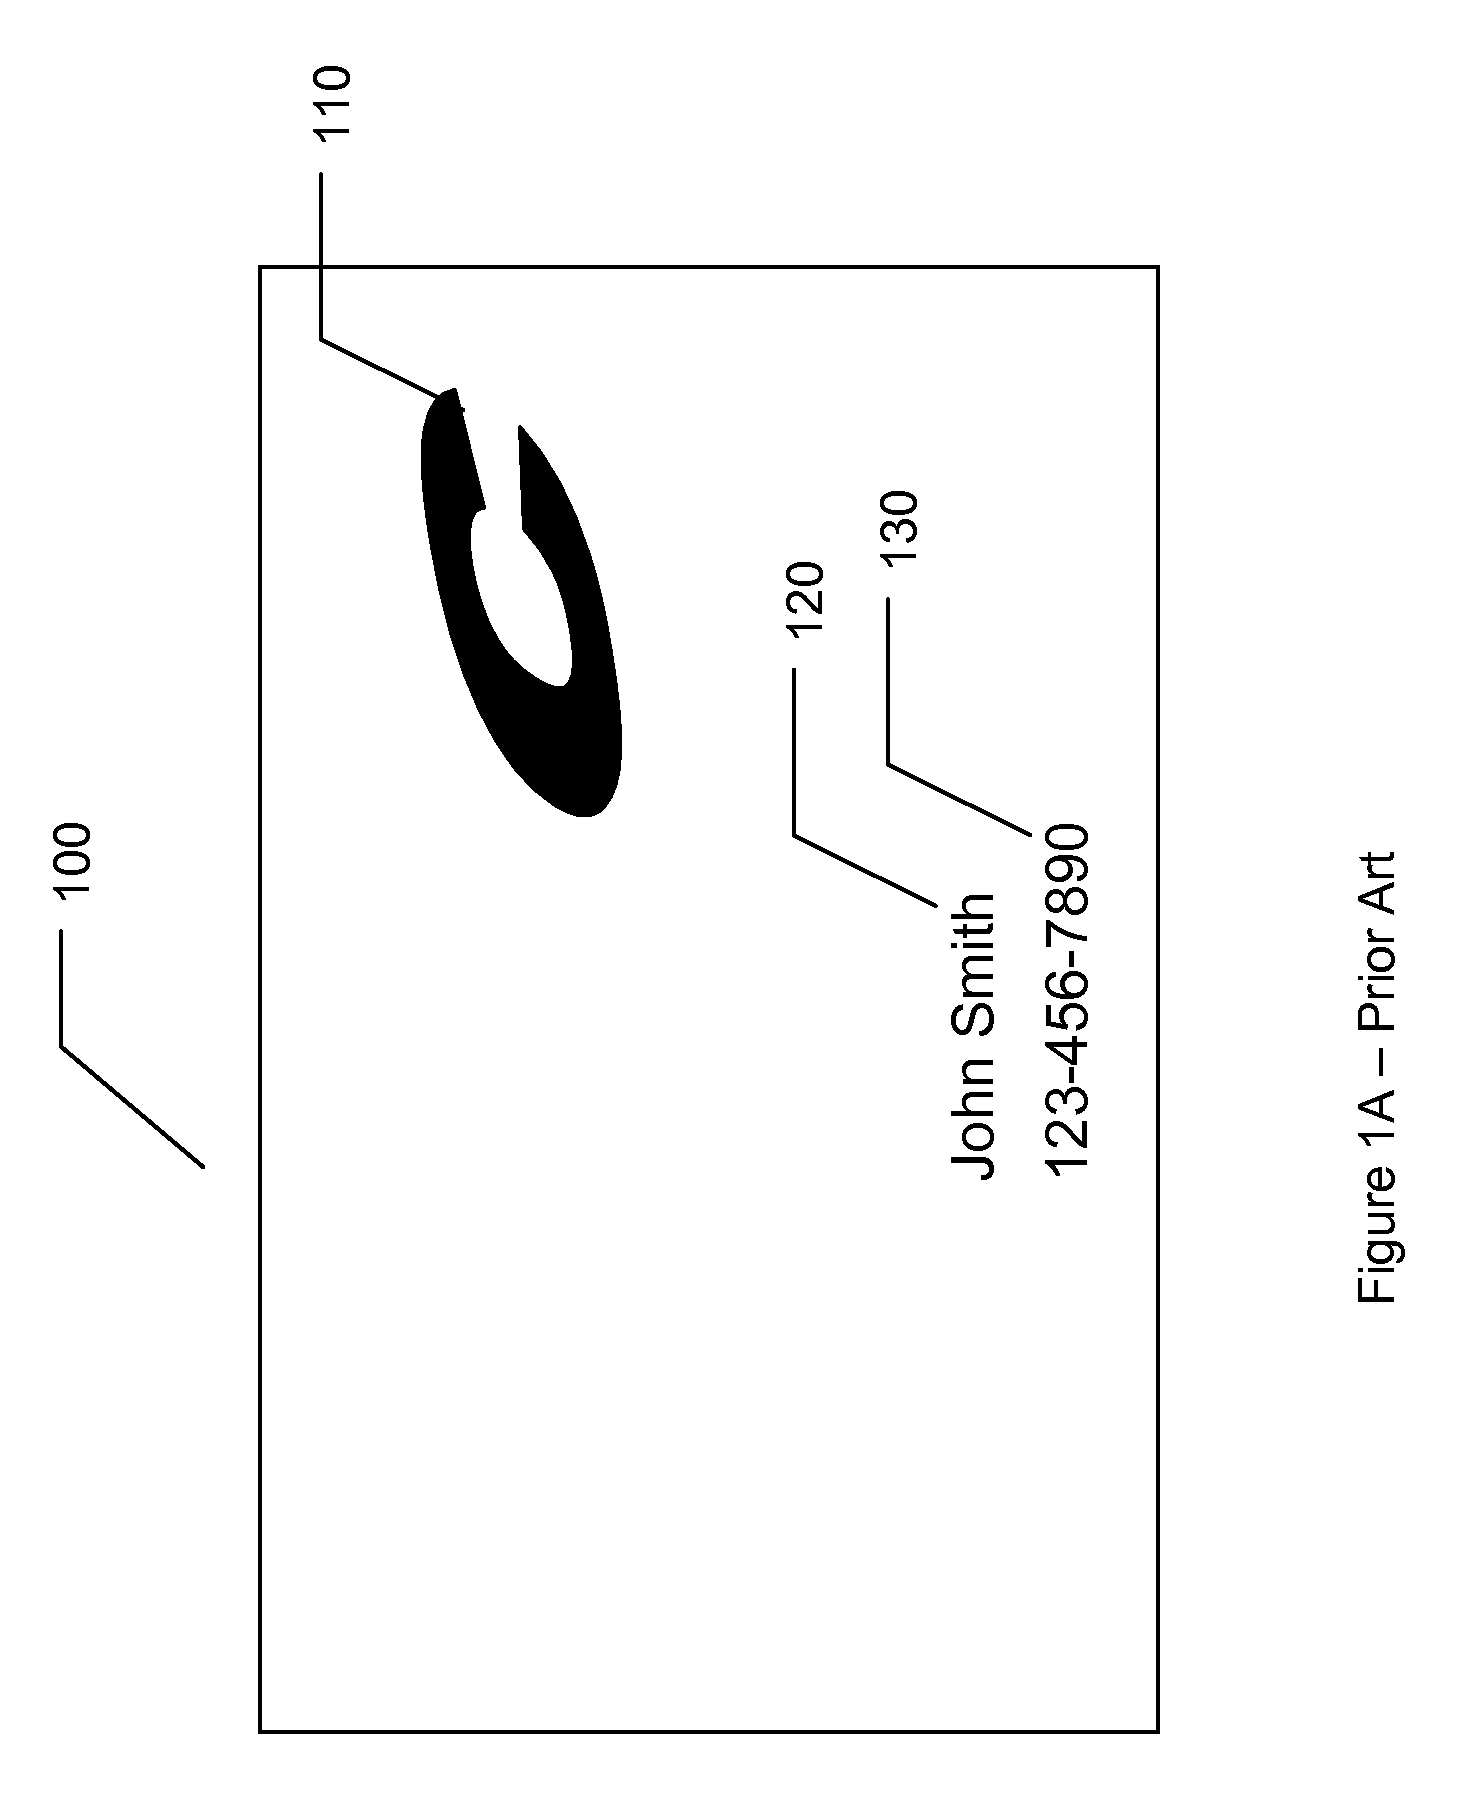 Secure card with stored biometric data and method for using the secure card